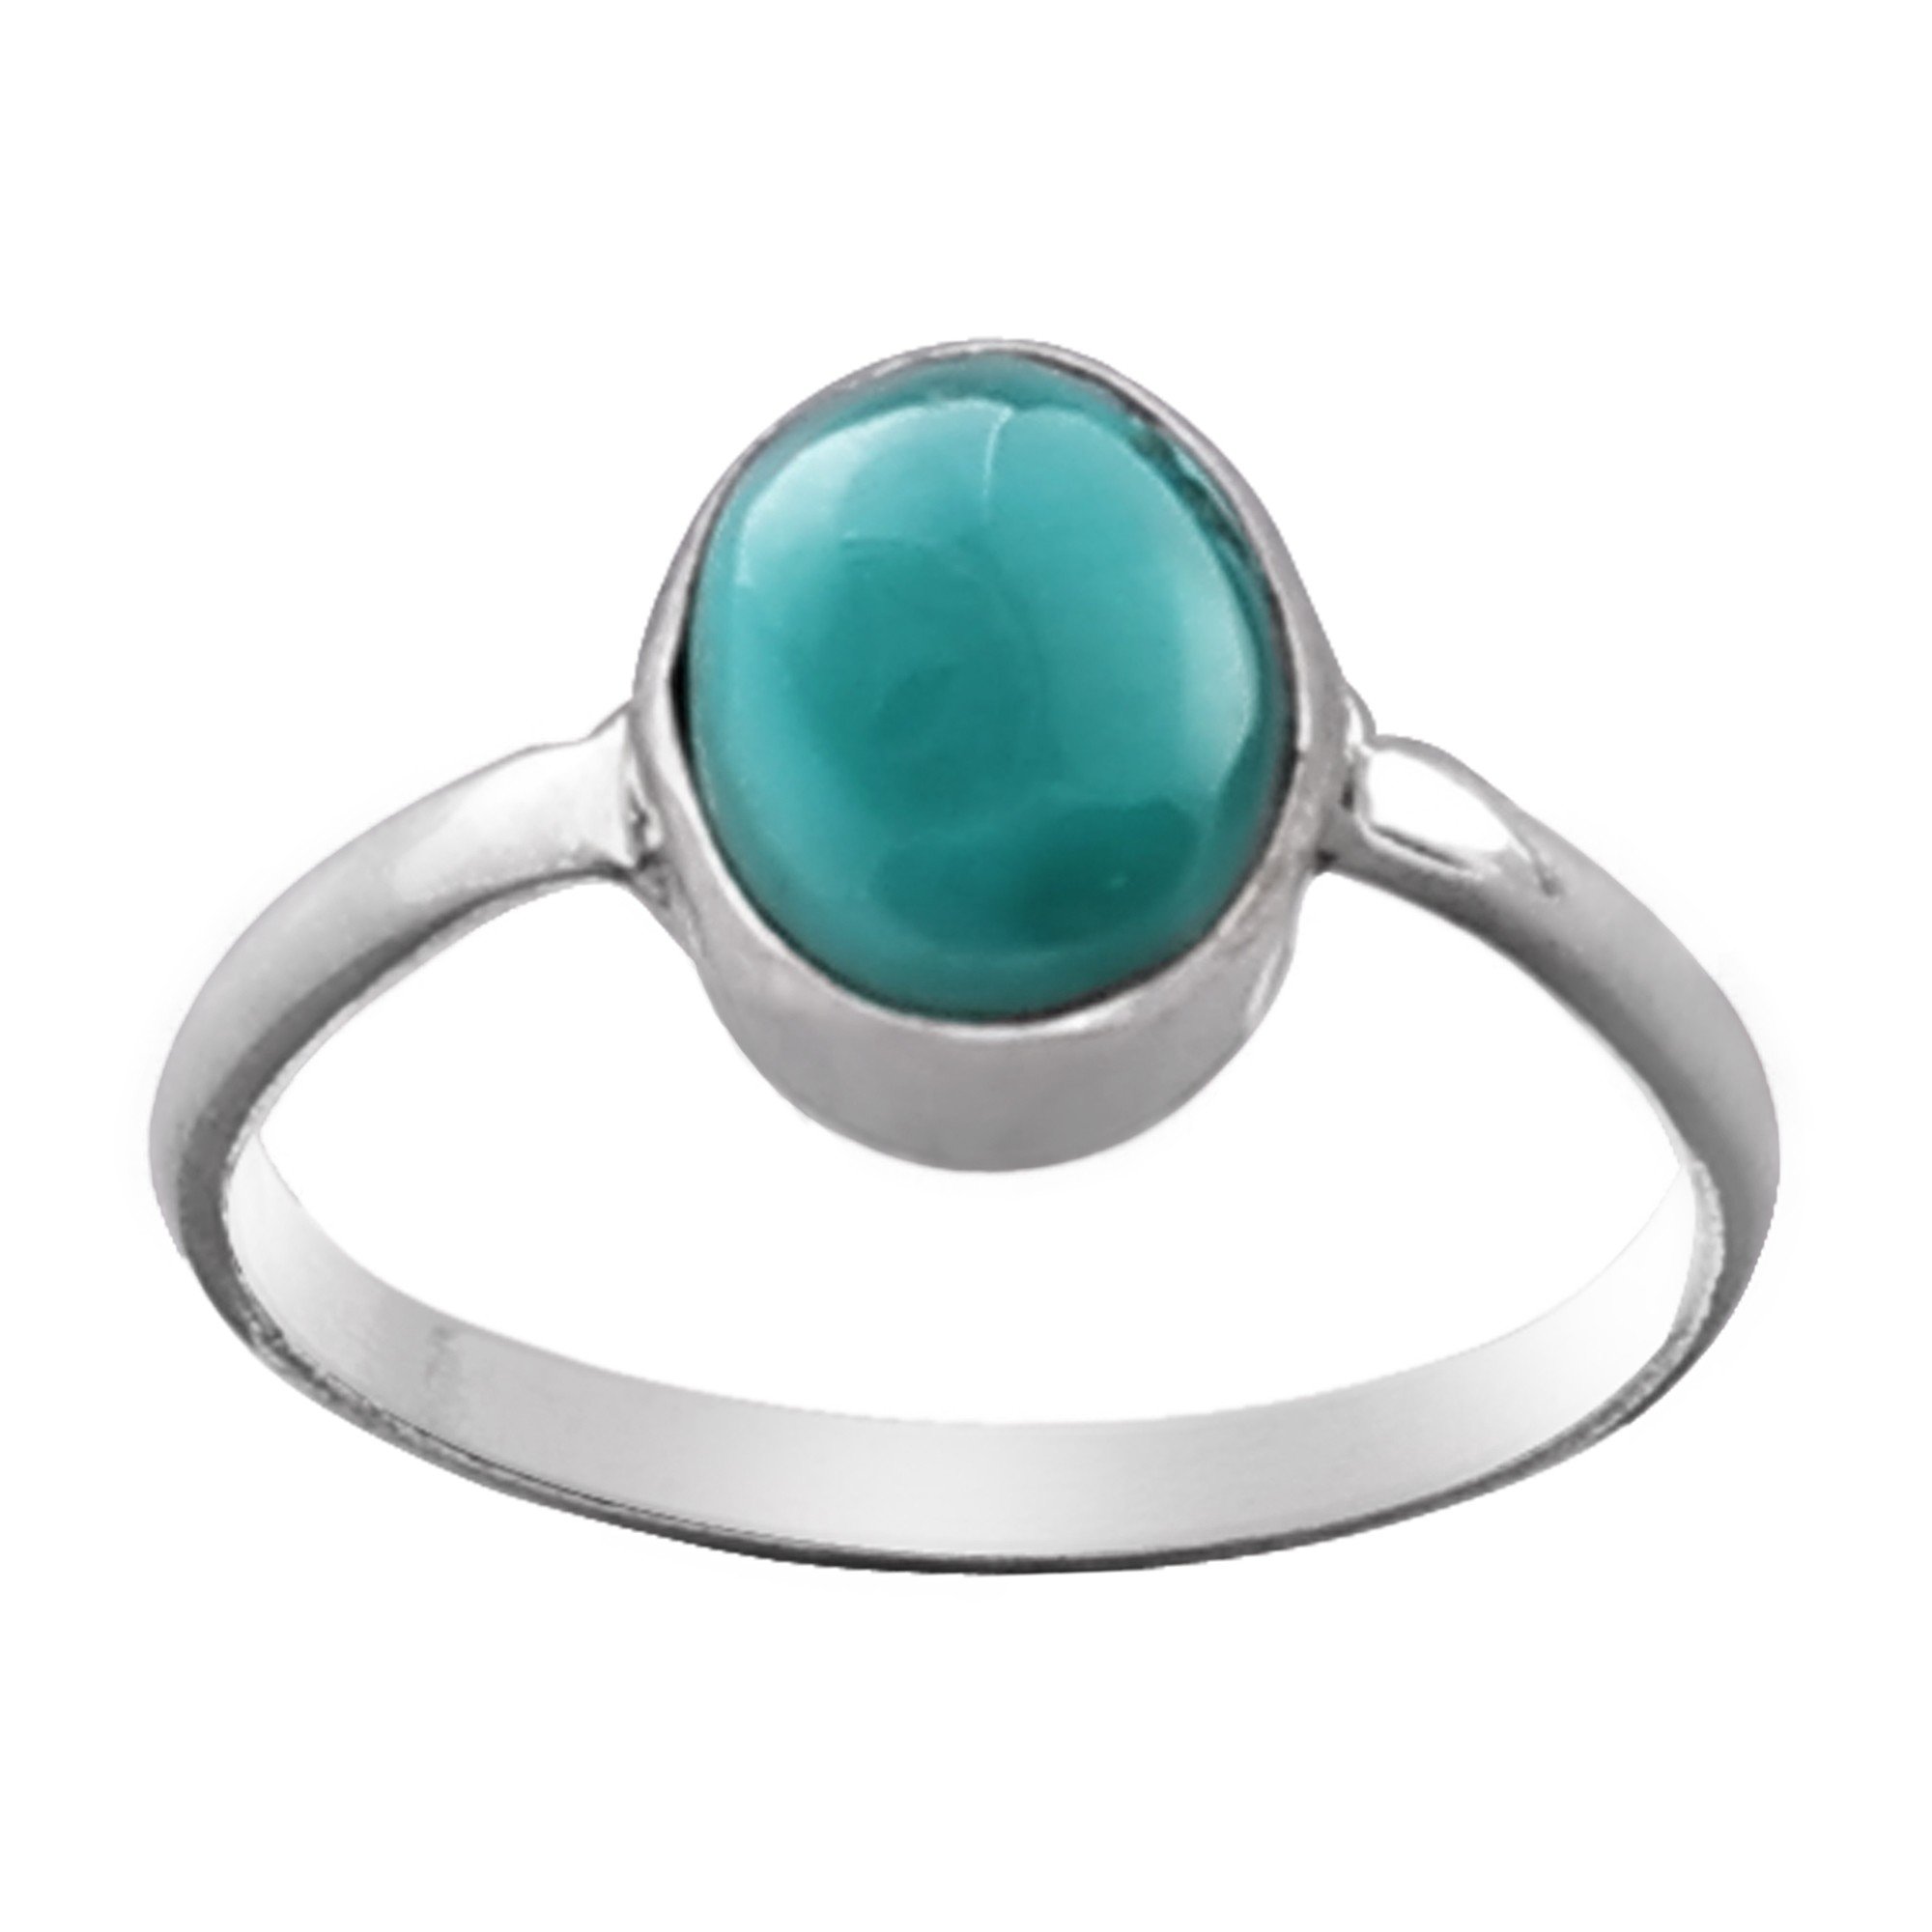 TURQUOISE WITH PYRITE STATEMENT RING – HALEY LEBEUF